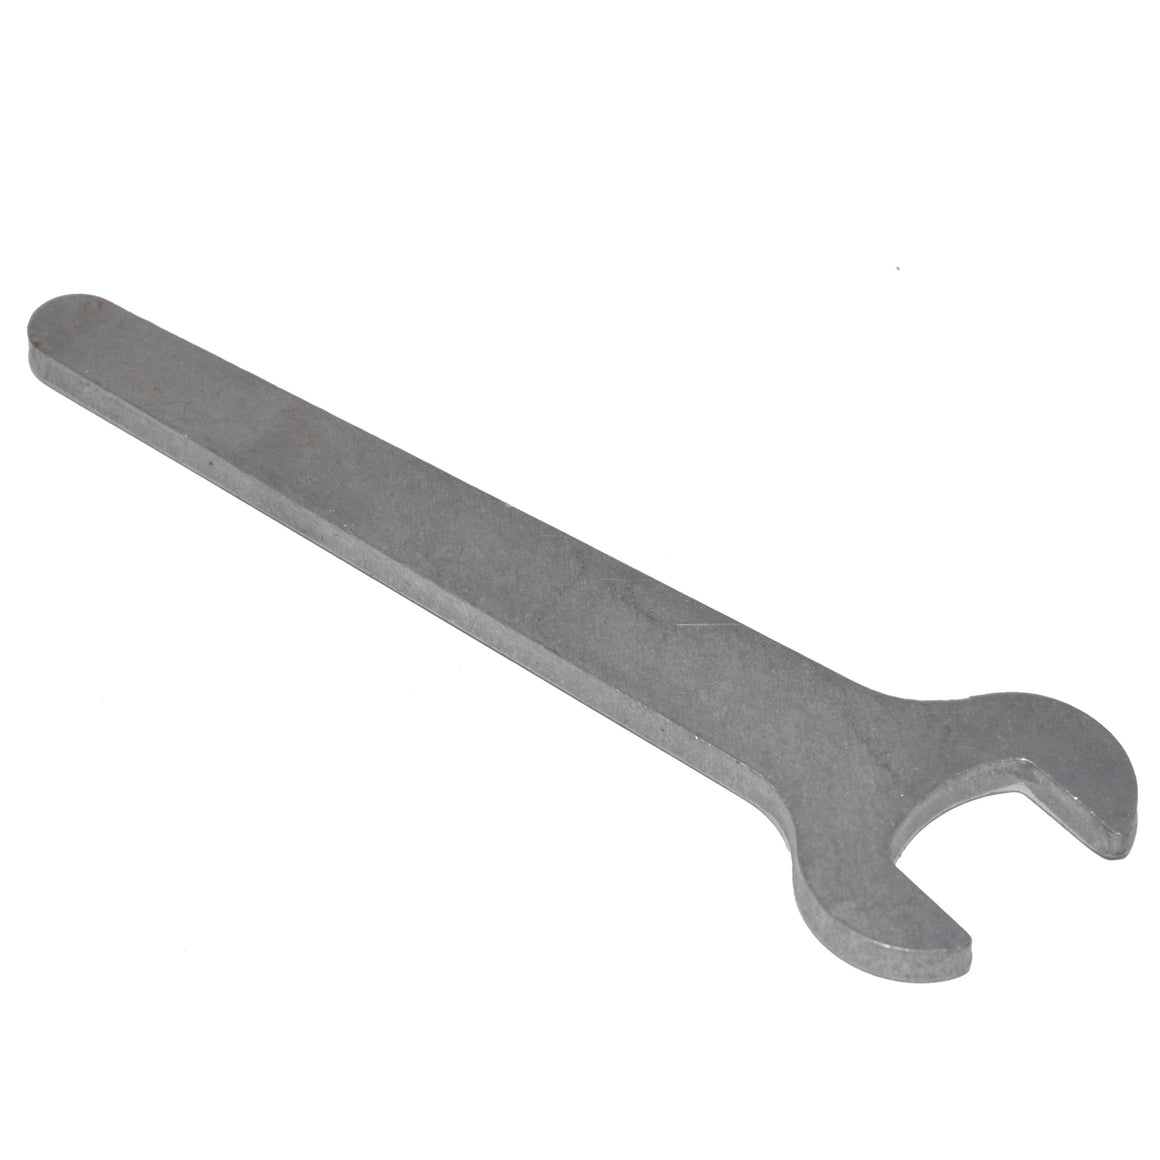 1100-068 - Wrench 11/16in